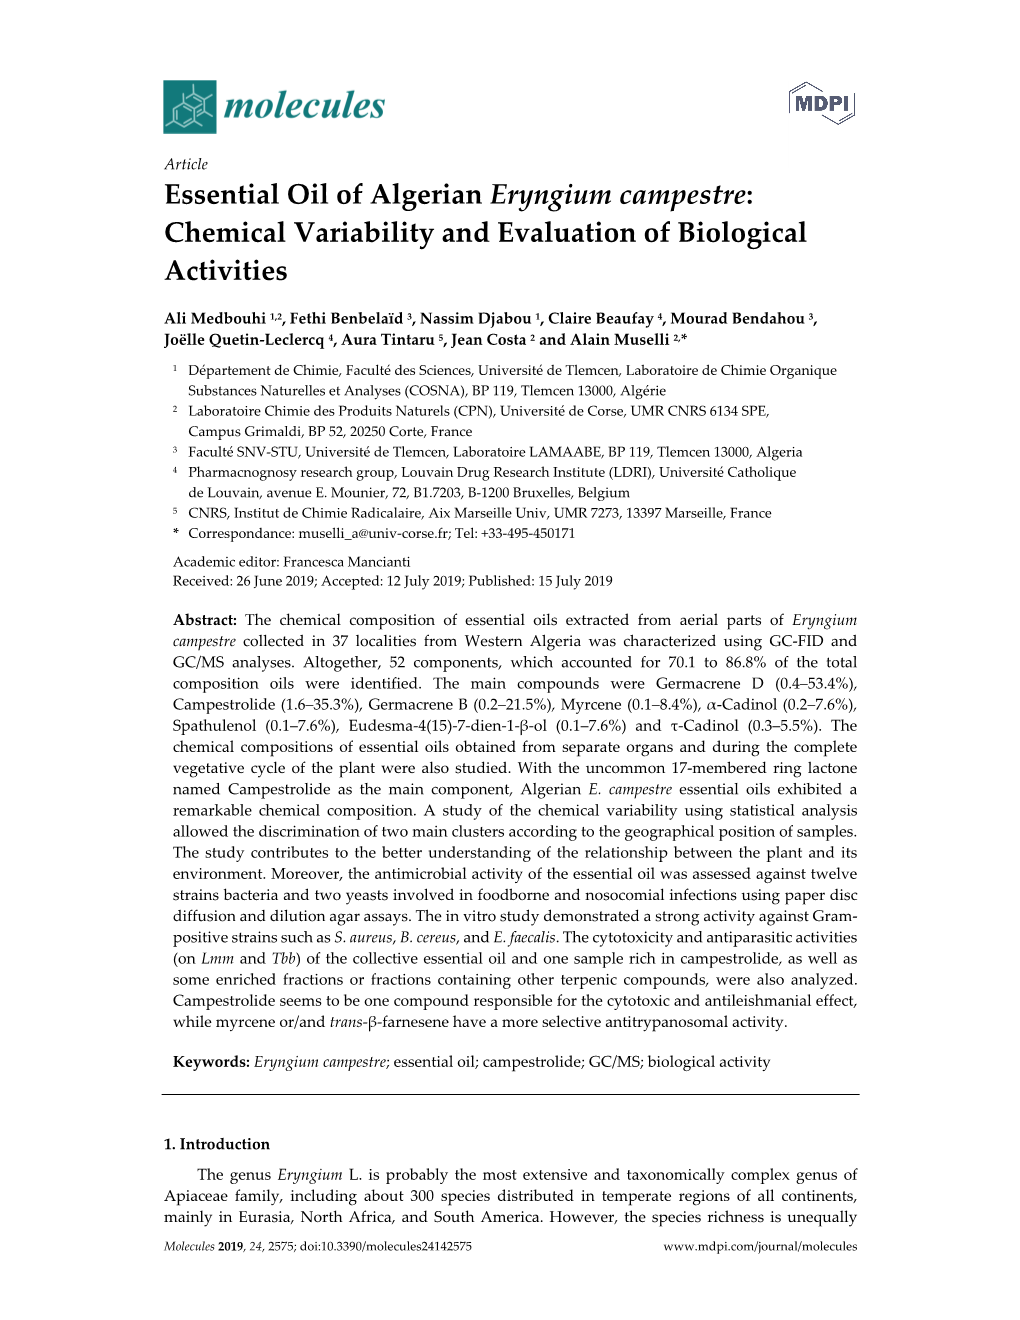 Essential Oil of Algerian Eryngium Campestre: Chemical Variability and Evaluation of Biological Activities